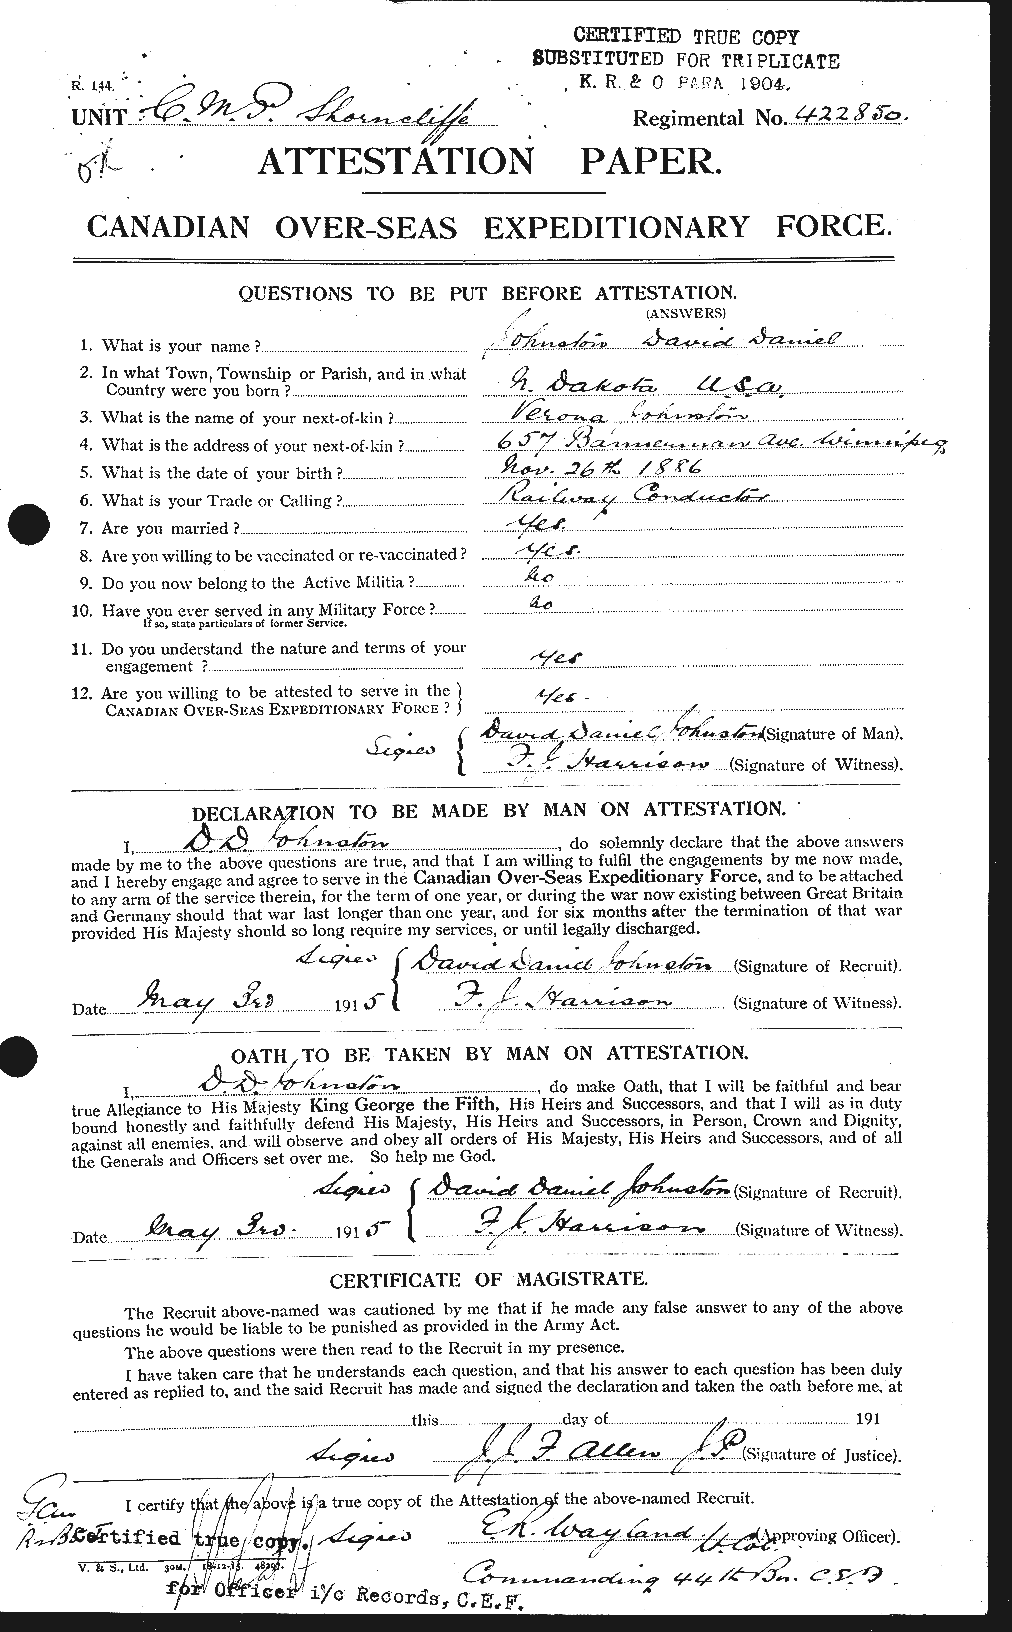 Personnel Records of the First World War - CEF 423171a